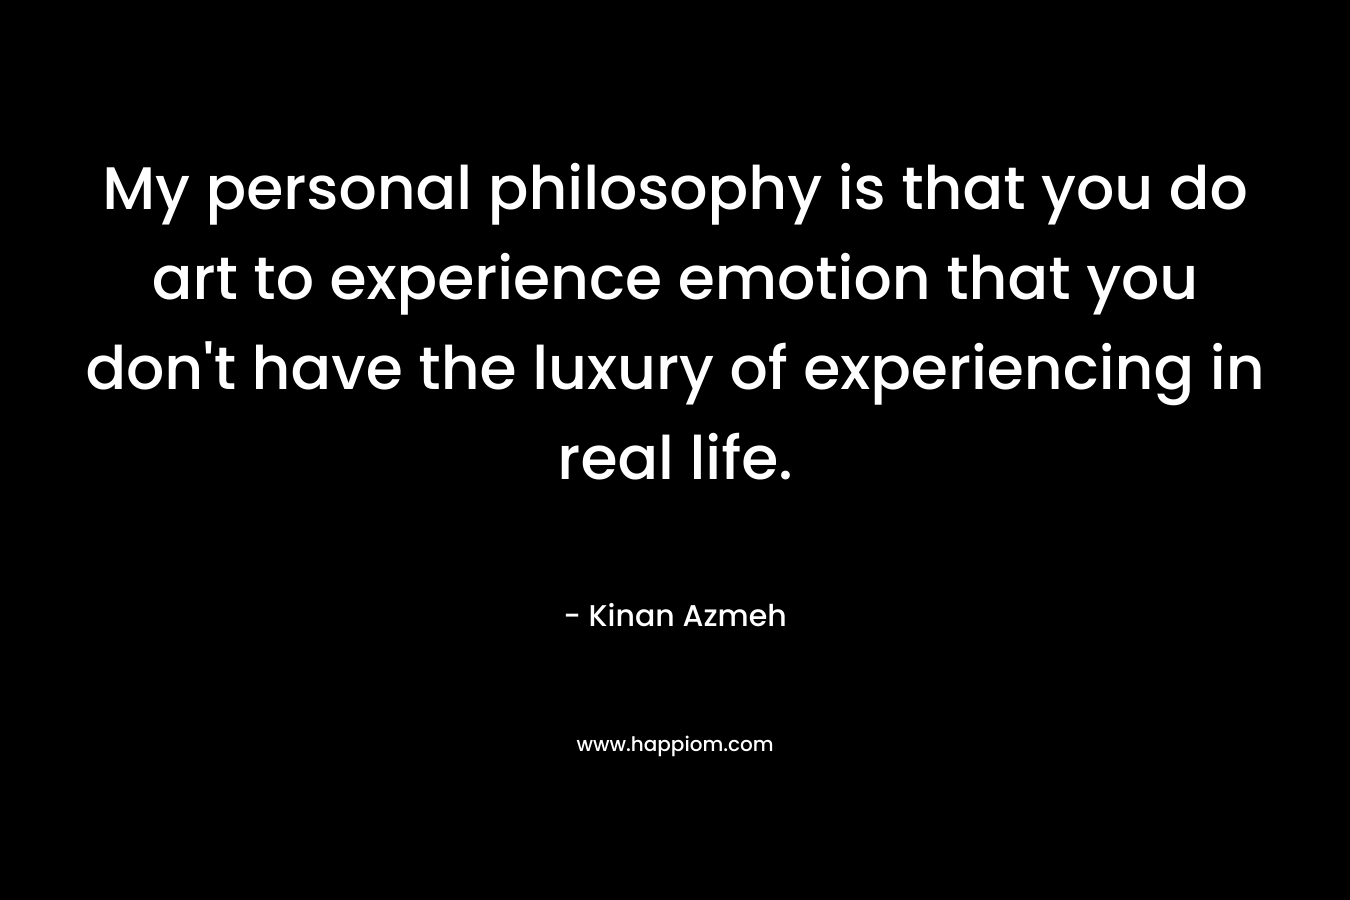 My personal philosophy is that you do art to experience emotion that you don’t have the luxury of experiencing in real life. – Kinan Azmeh